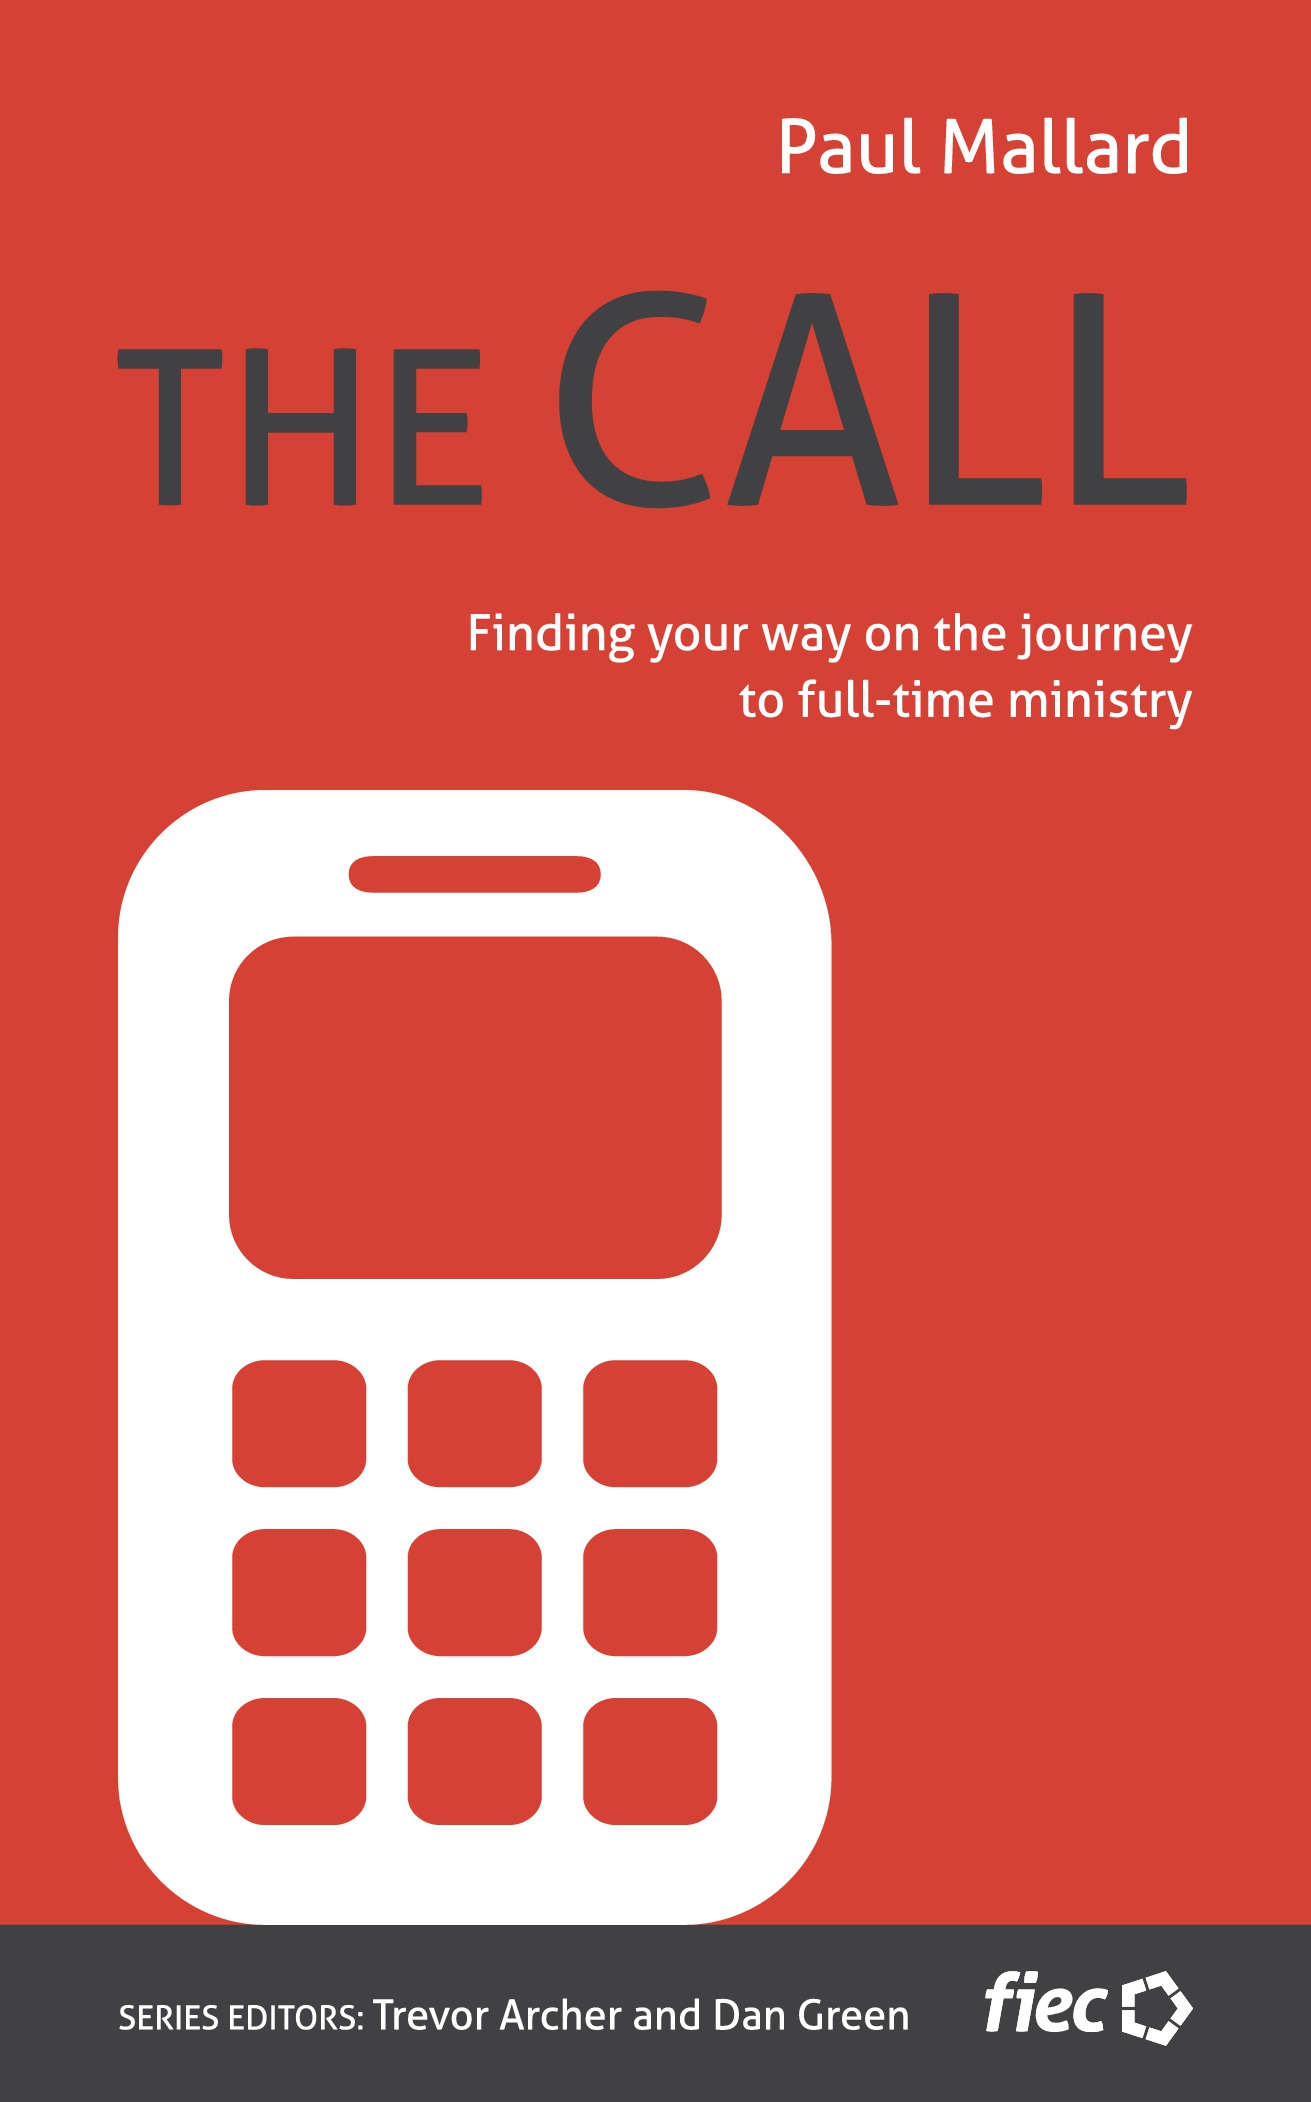 The Call book cover.jpg